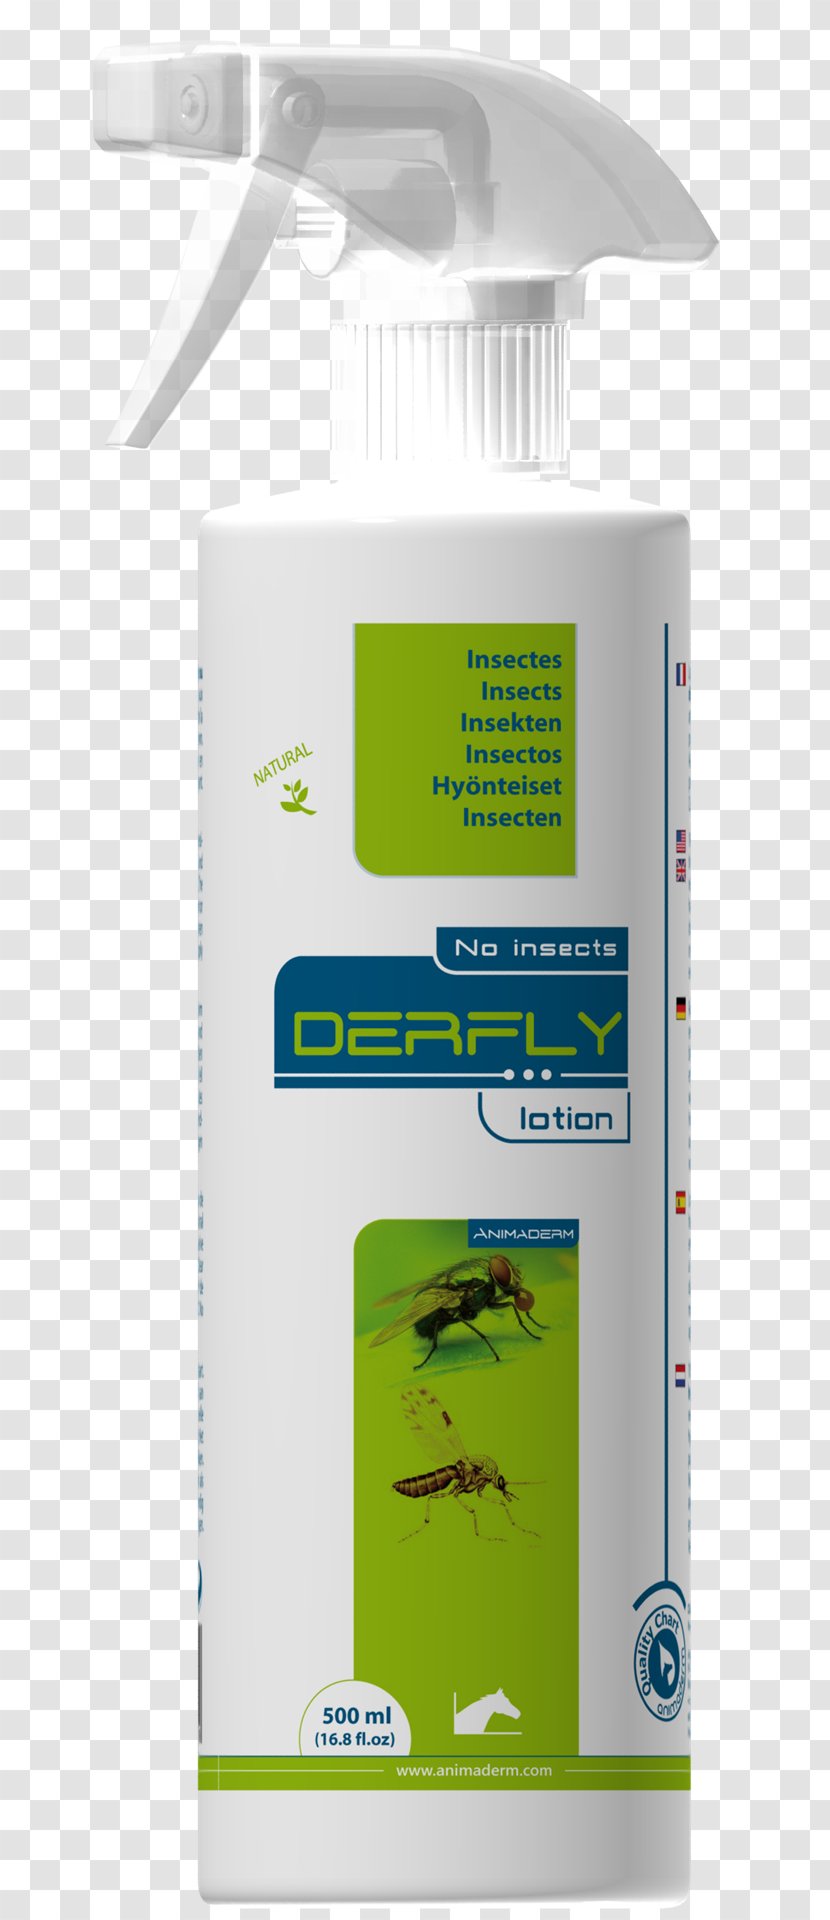 Horse Milliliter Fly Animaderm Insect - Green Transparent PNG